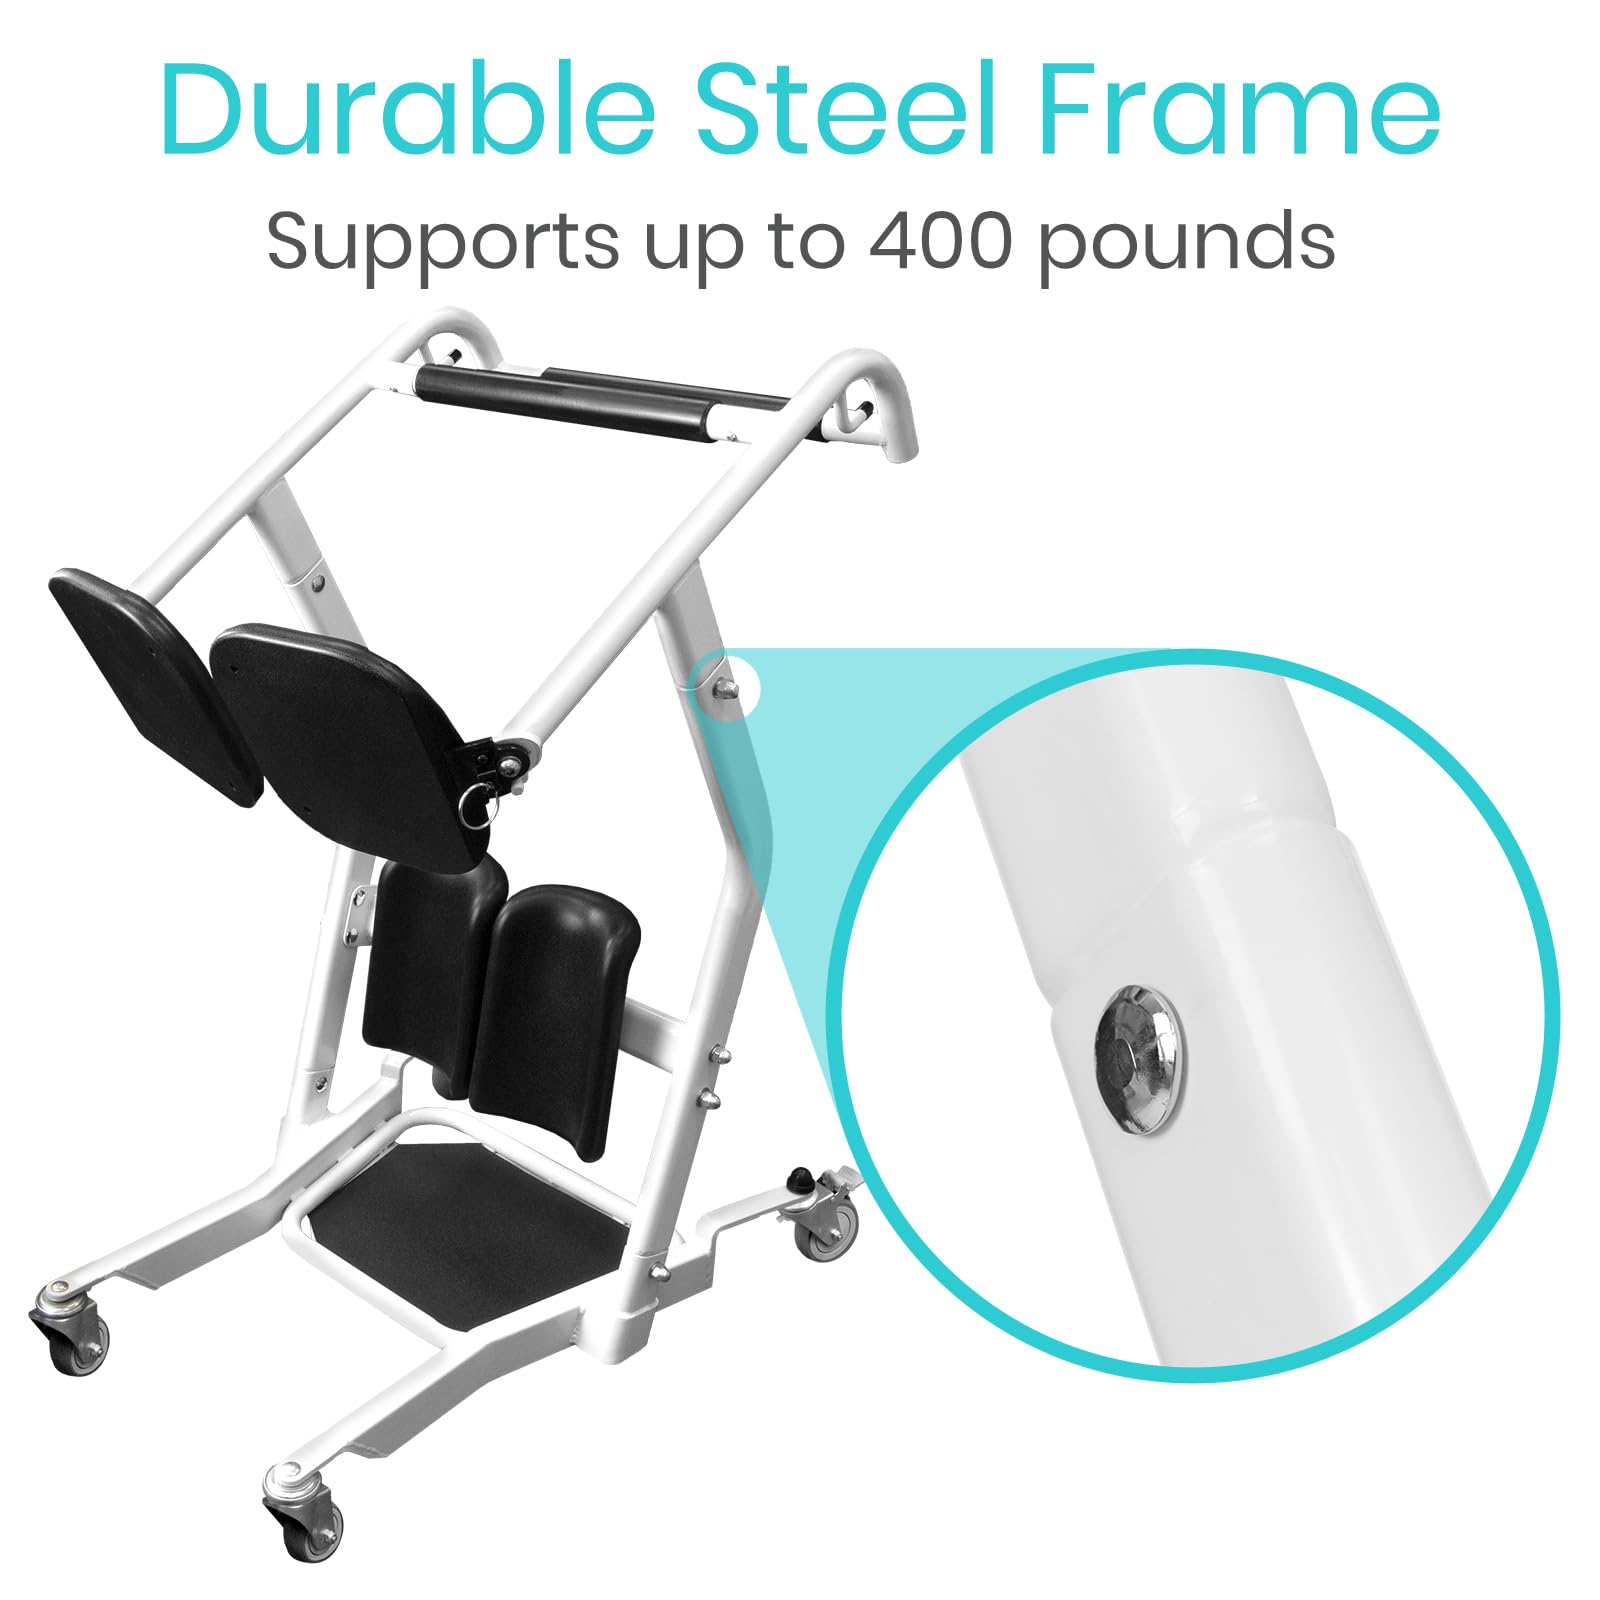 Vive Mobility Sit to Stand Lift Patient Transport Unit for Elderly - Transfer Device for Home Care Use, Disability Aid Product for Adults - Medical Equipment Lift Assist, Caregiver Supplies